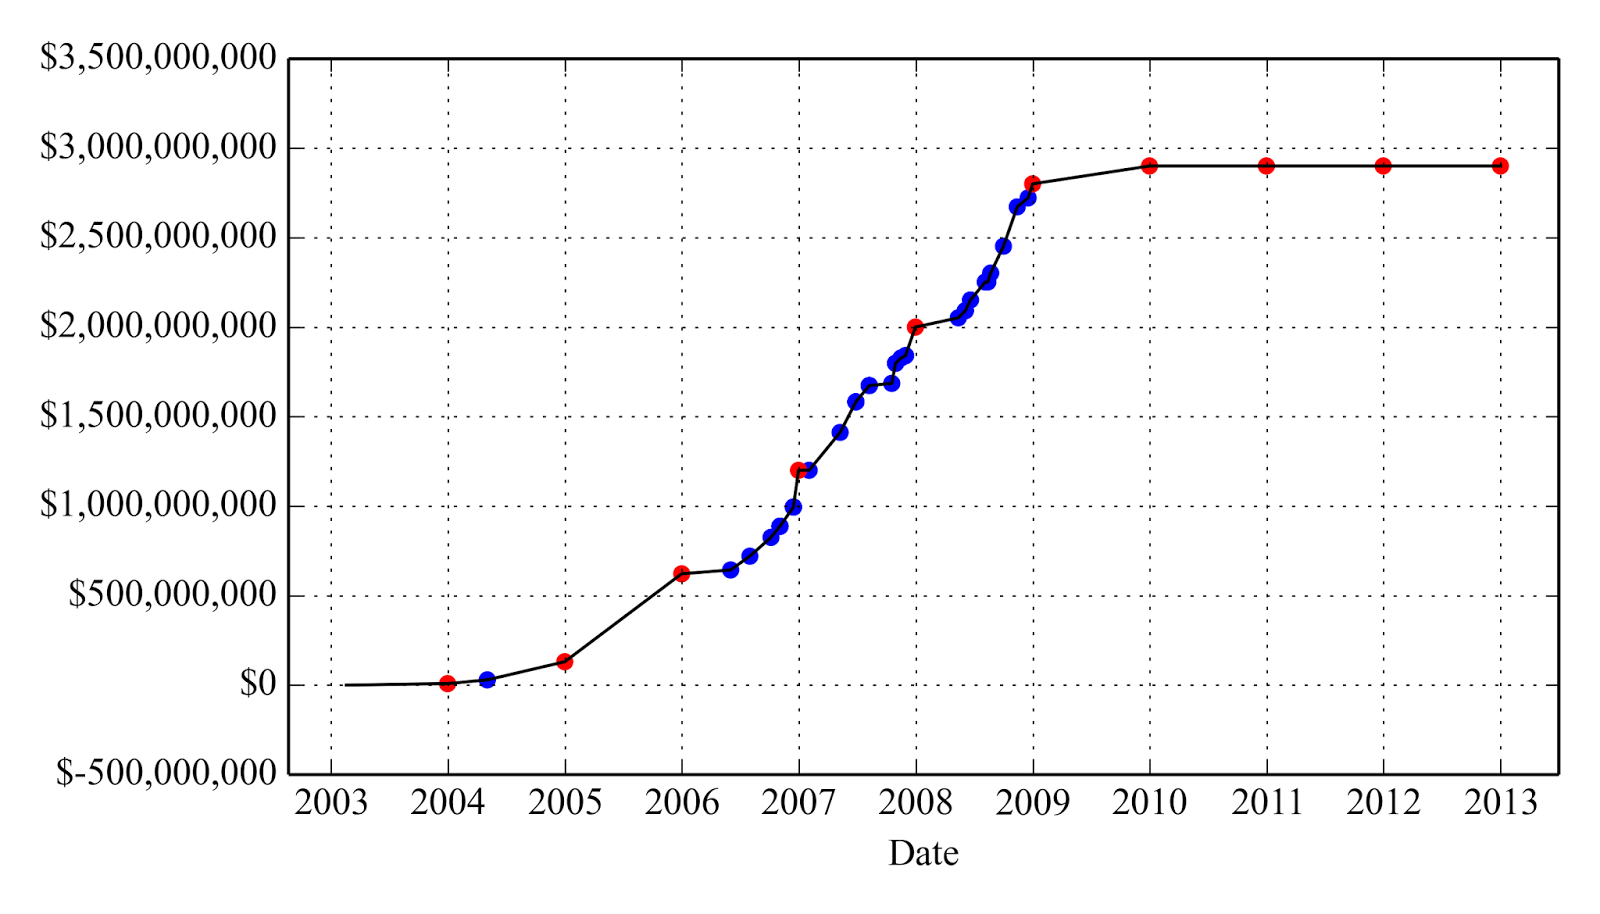 A figure showing a line graph demonstrating Behringer Harvard REIT I gross proceeds from 2003 to 2013.